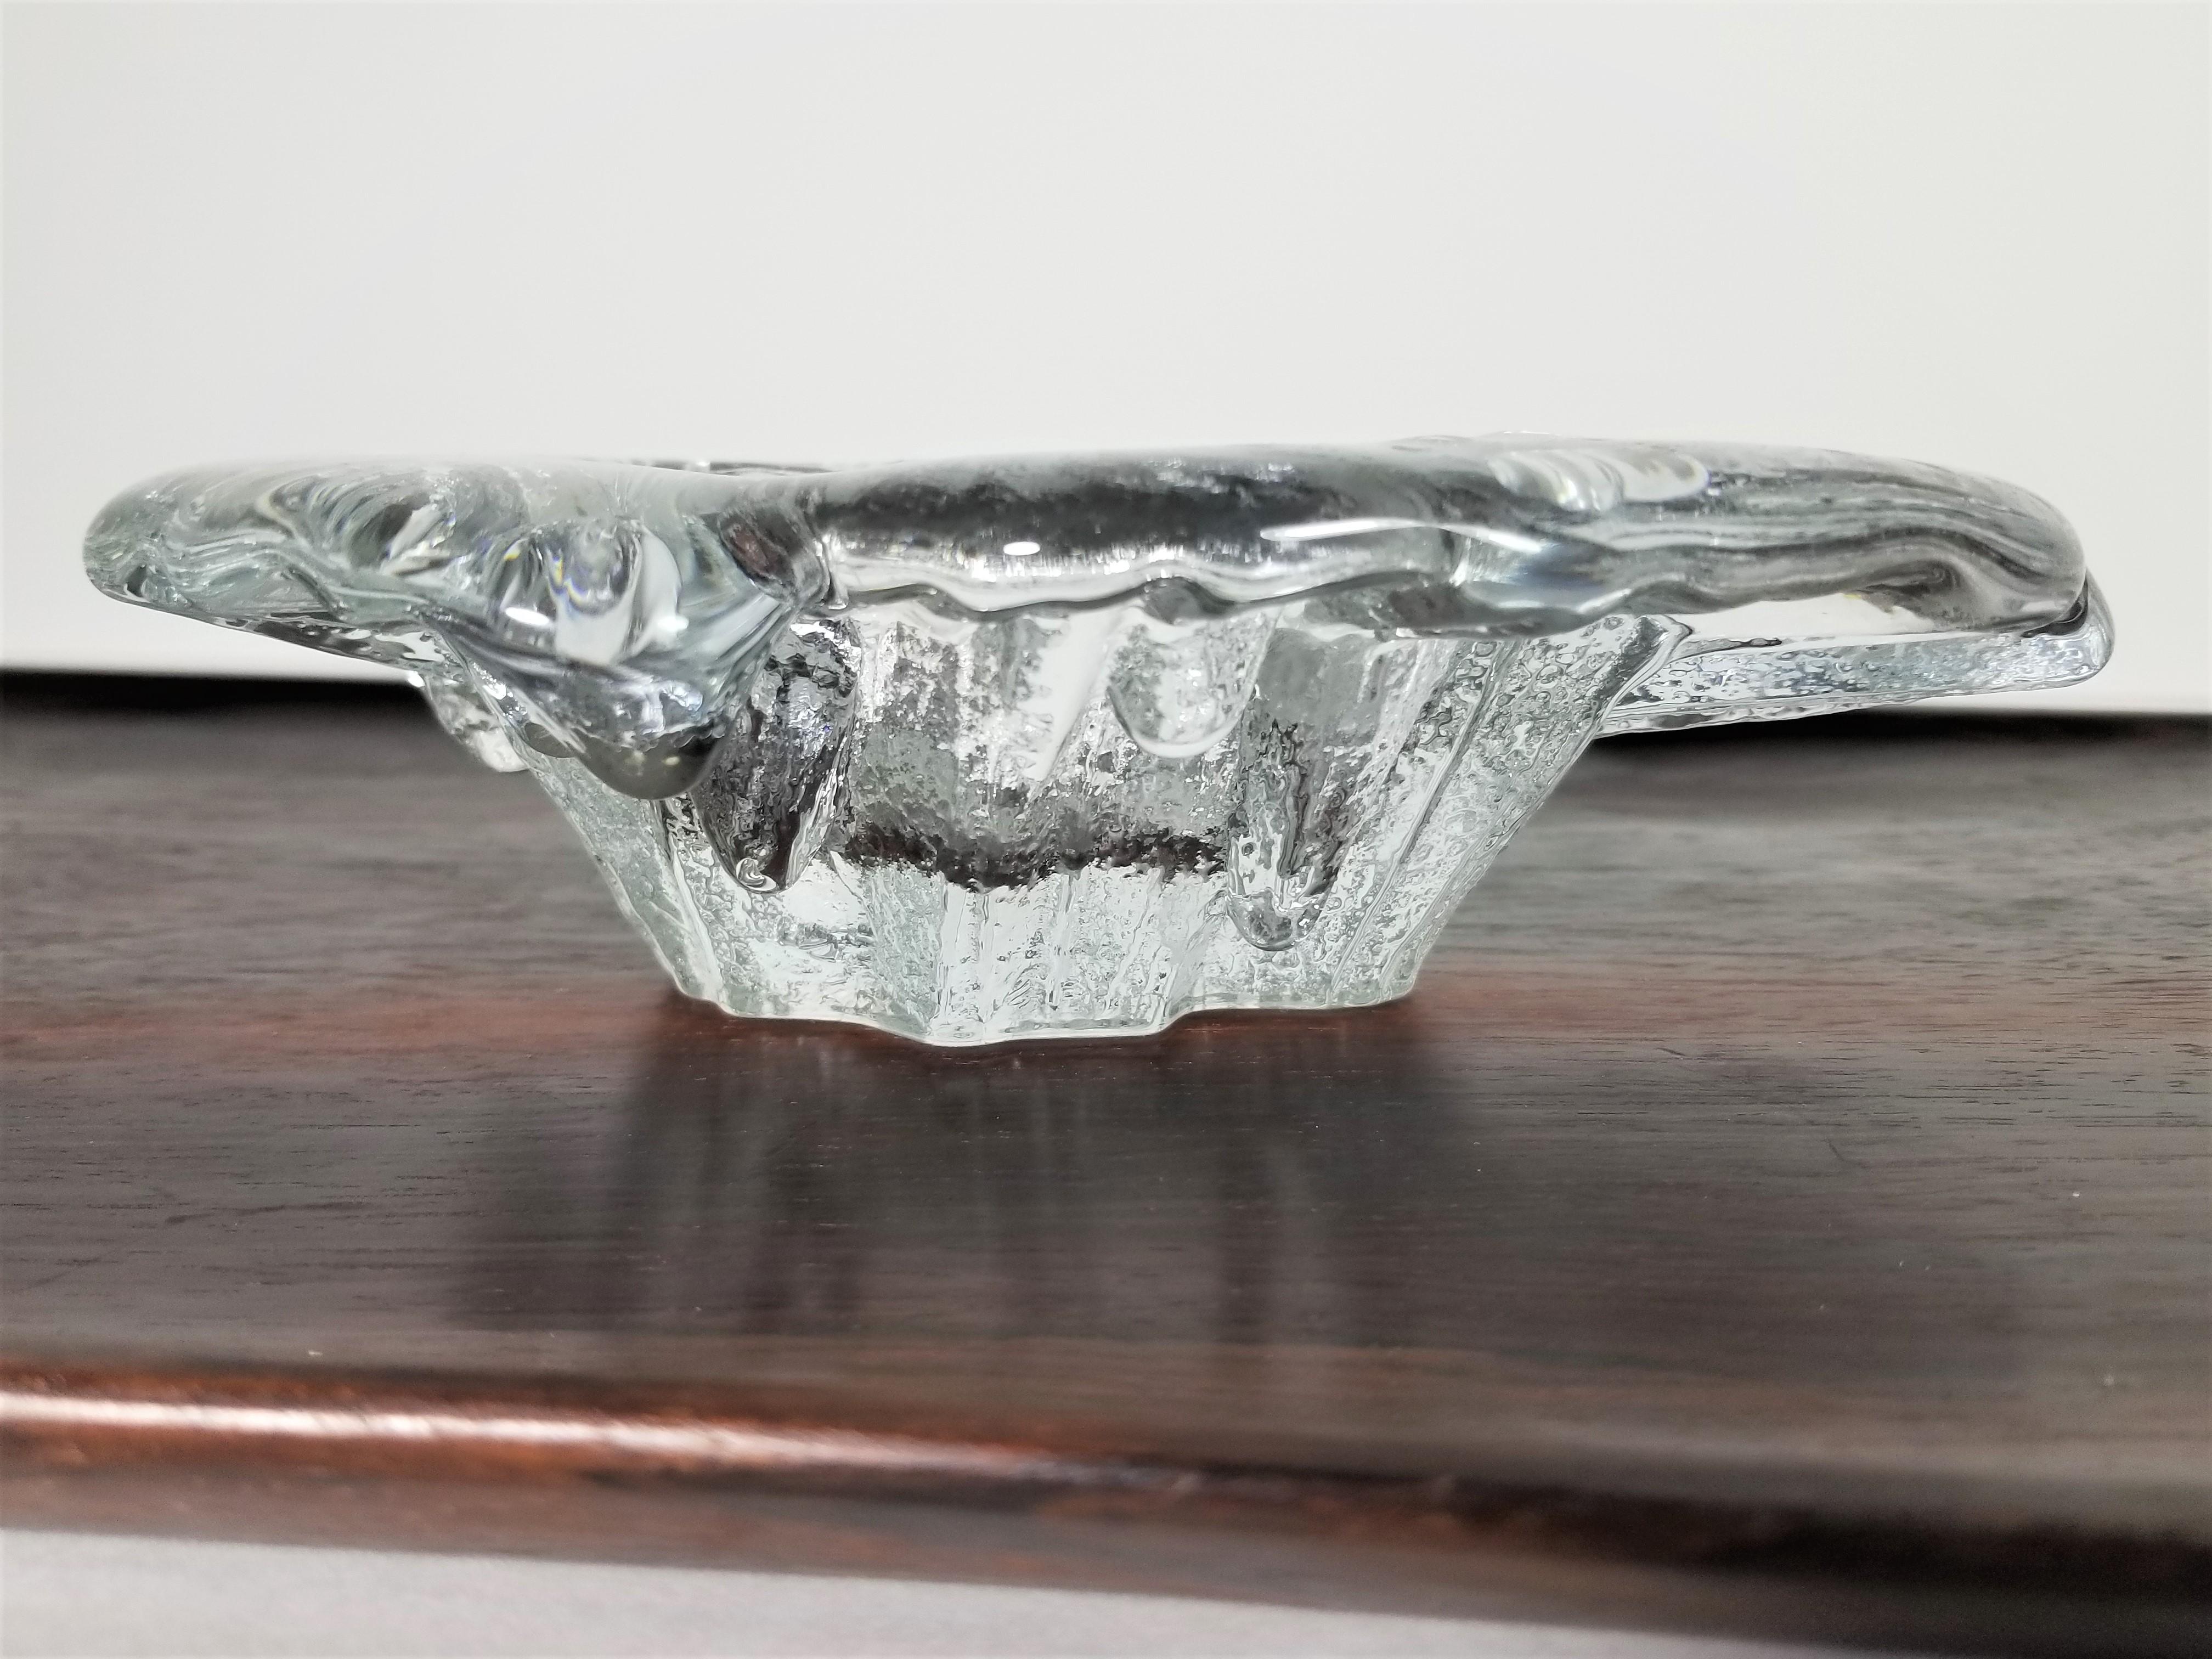 Blenko Ashtray 1960s Midcentury Brutalist Glass In Excellent Condition For Sale In New York, NY